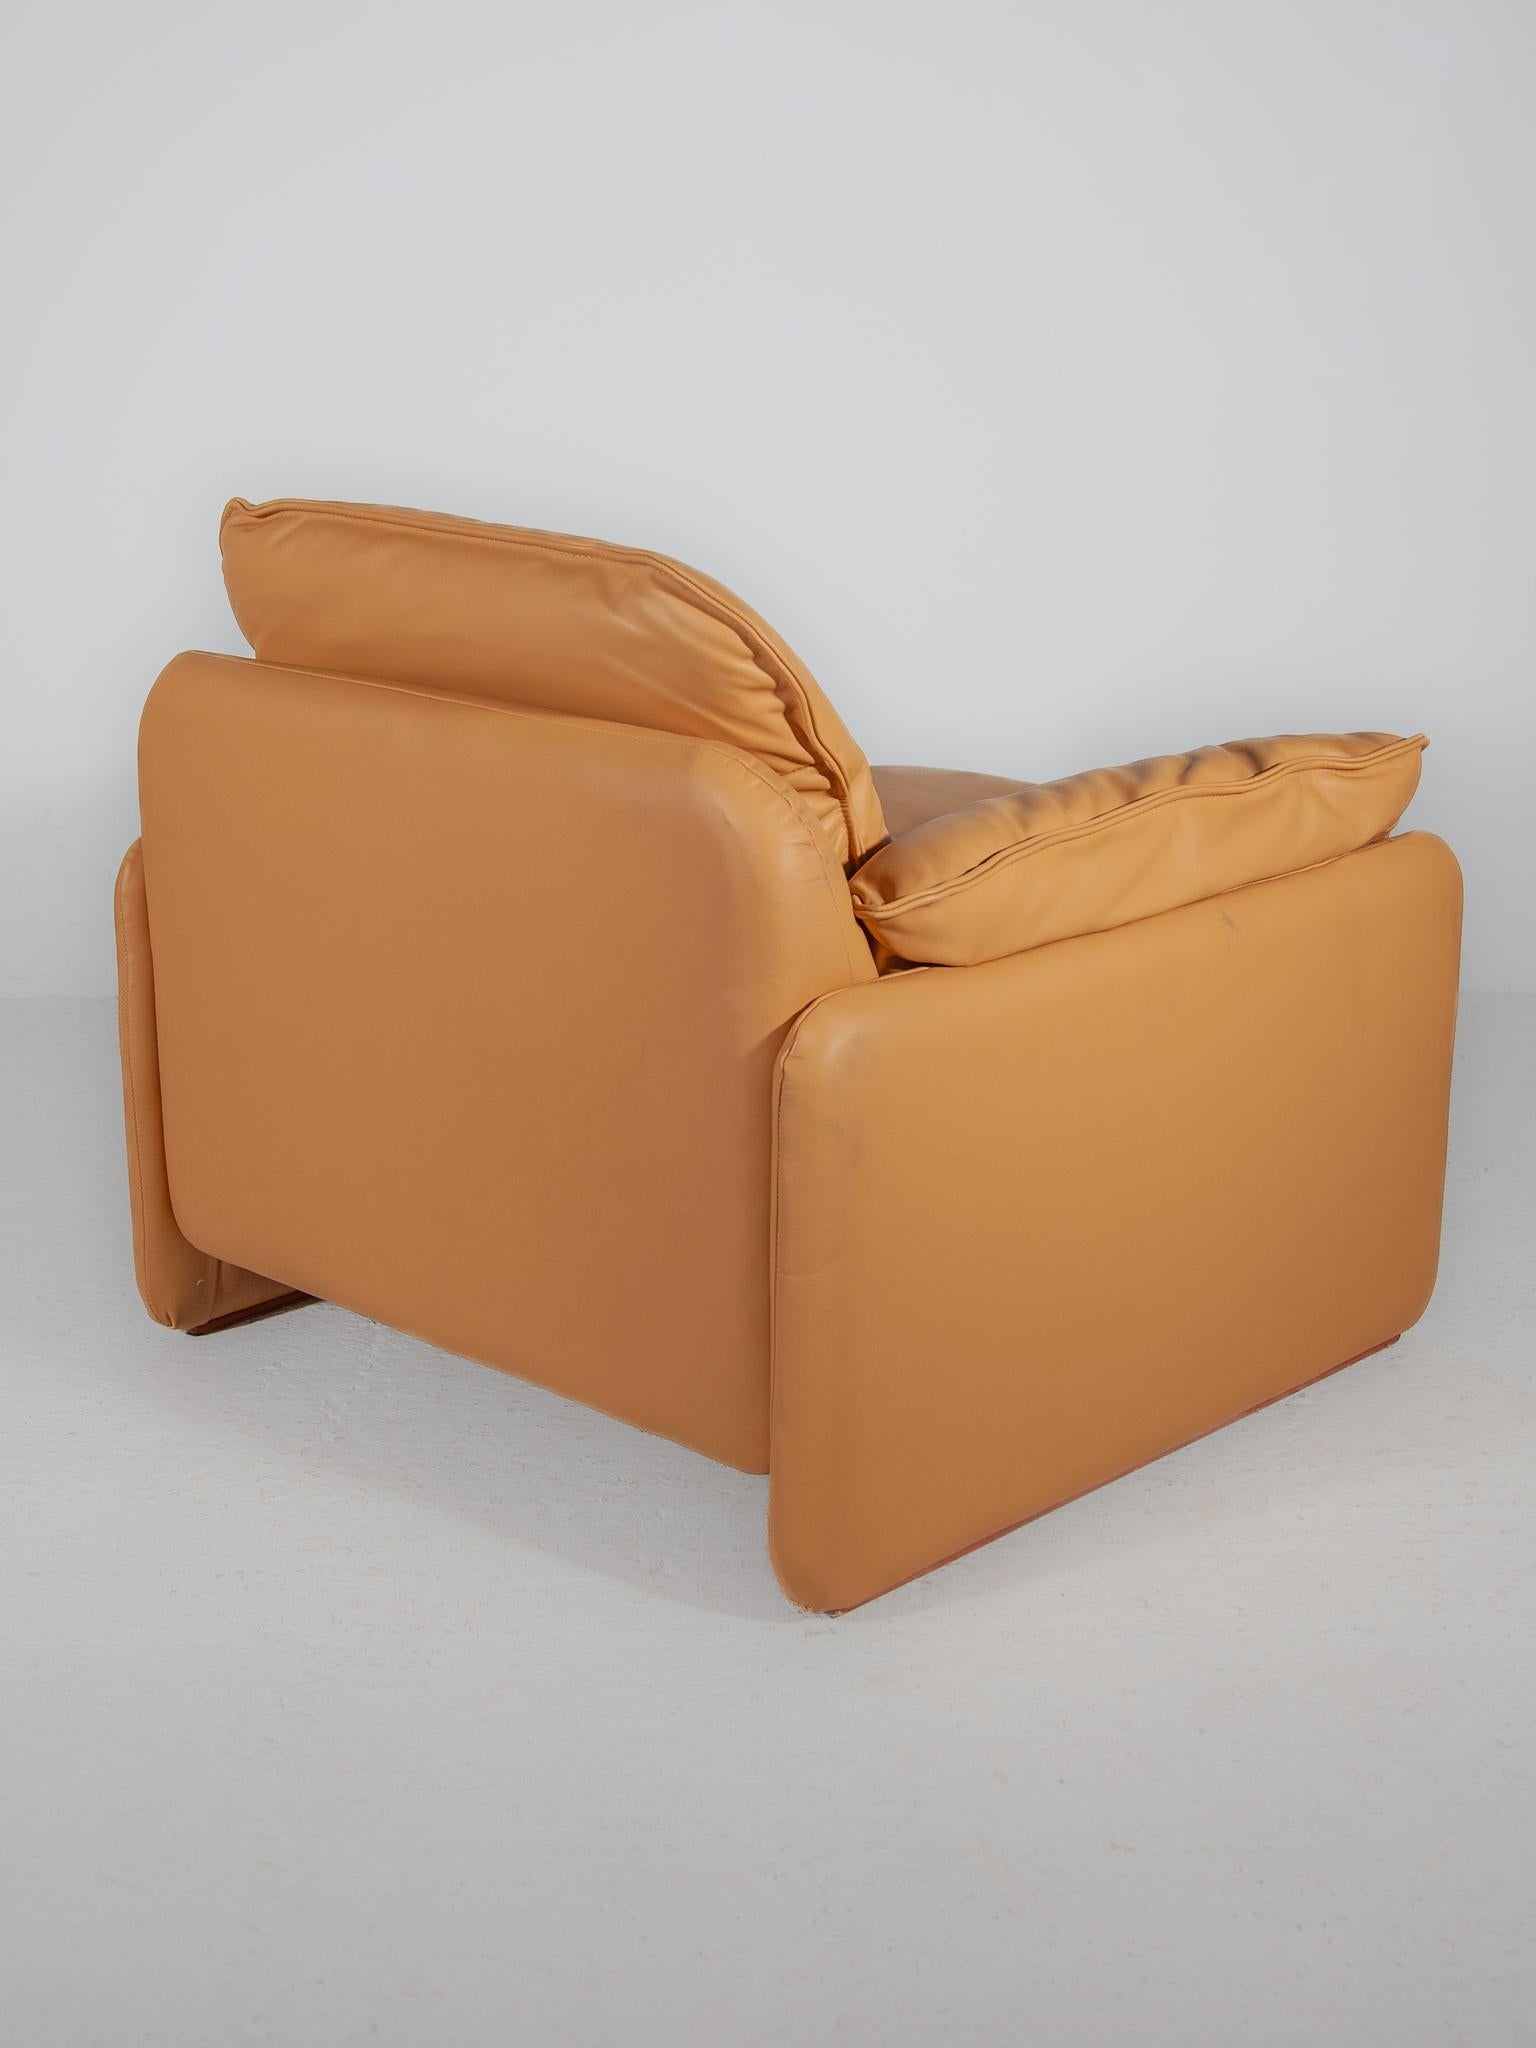 Set of 2 Ds-61 Armchairs Camel Leather designed by De Sede, 1970s For Sale 5